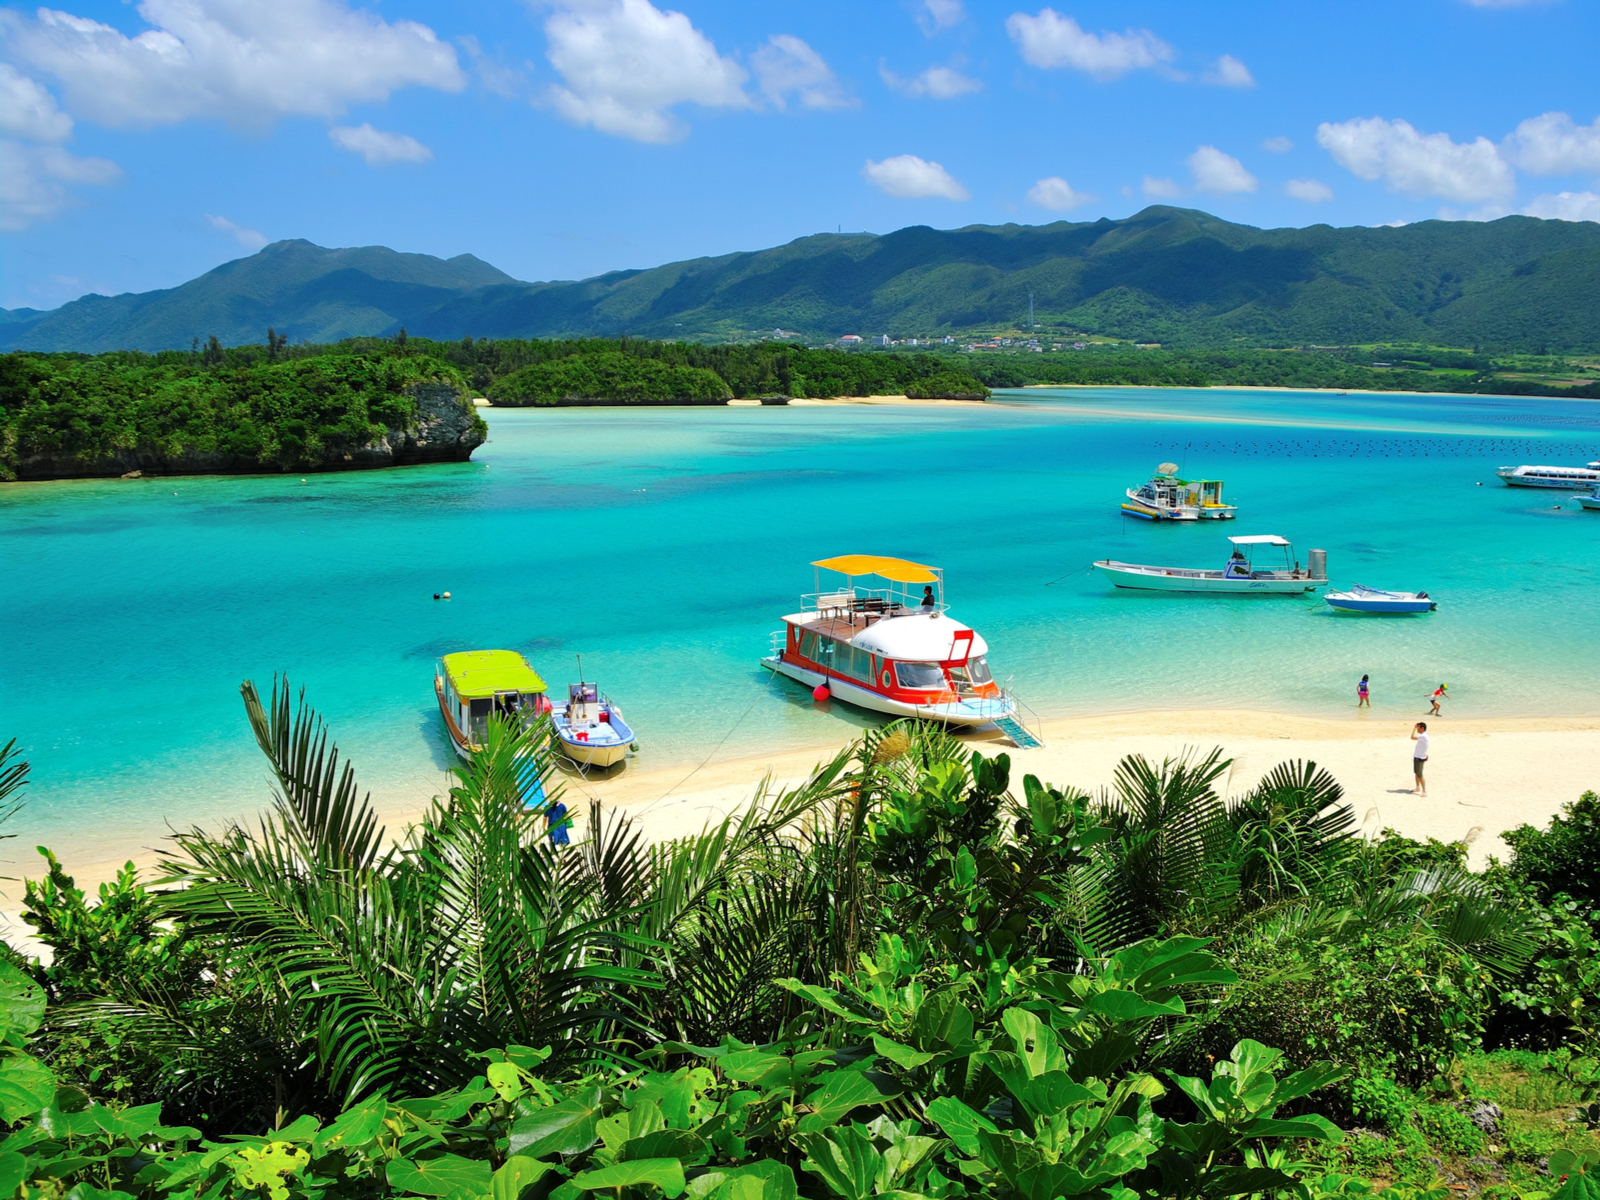 Kabira Bay on one of the best places to visit in Japan, Ishigaki